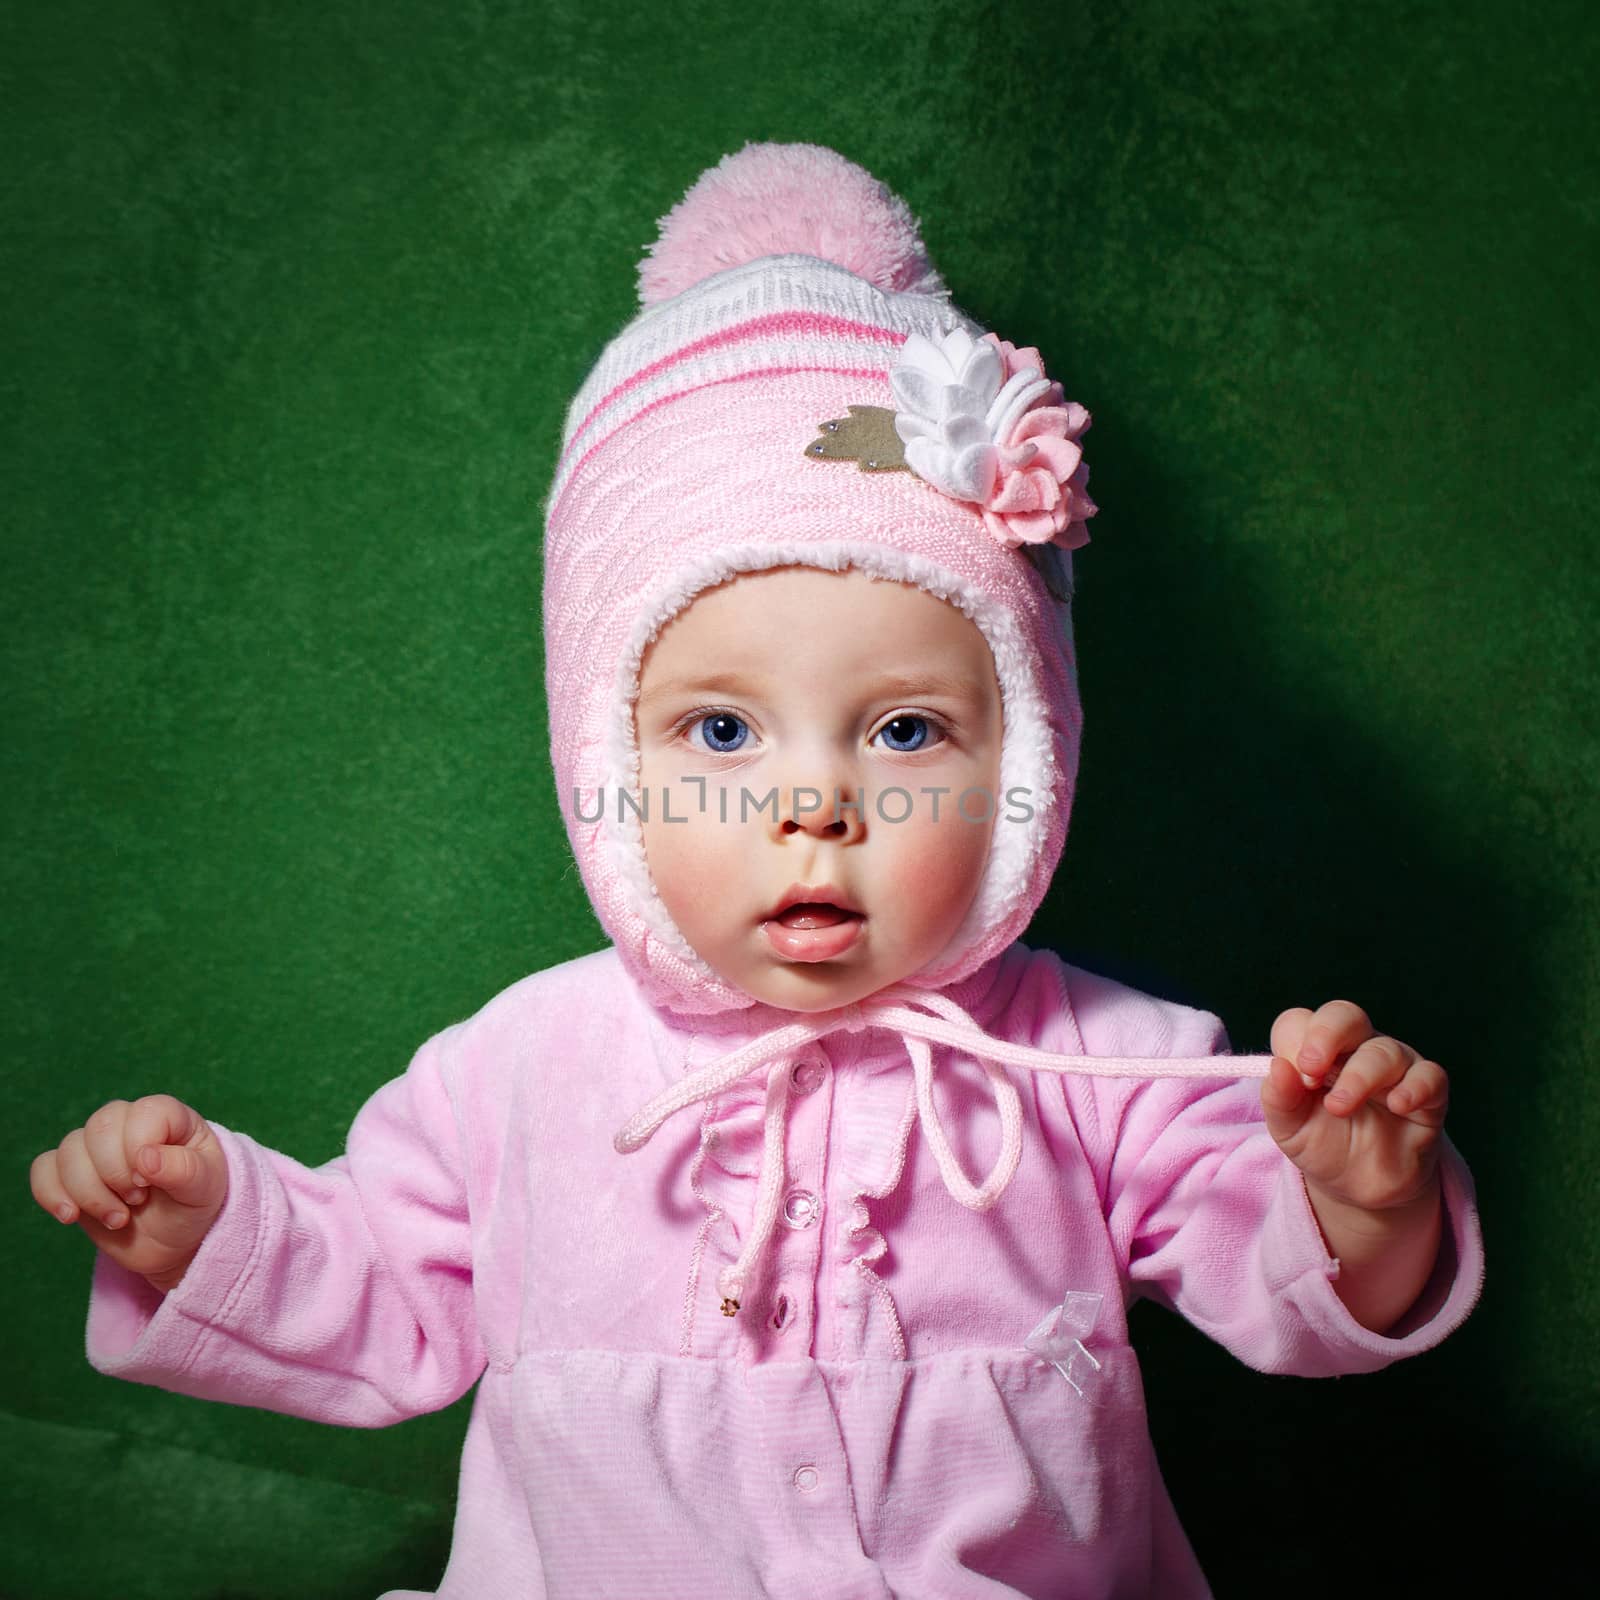 Cute little girl with blue eyes wearing pink hat